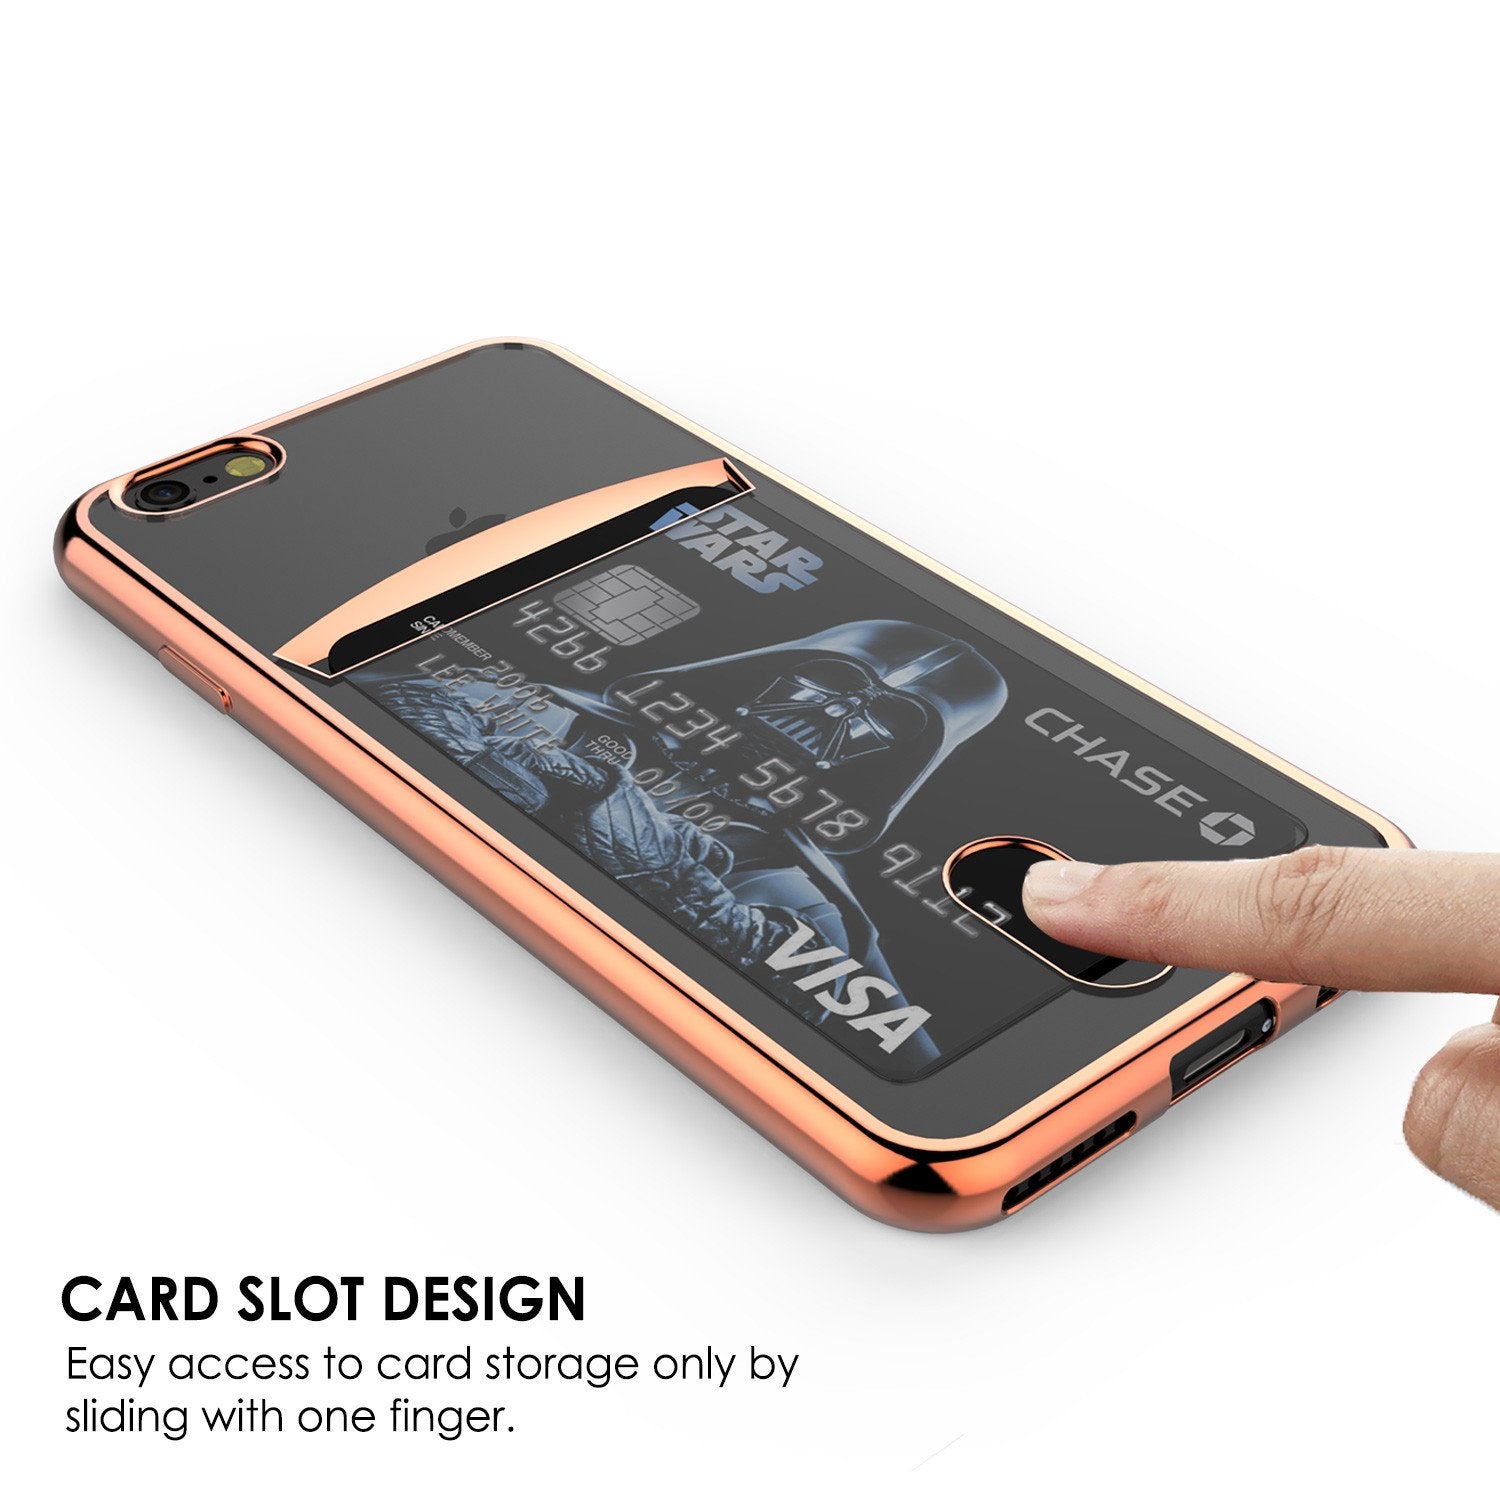 iPhone 7+ Plus Case, PUNKCASE® LUCID Rose Gold Series | Card Slot | SHIELD Screen Protector - PunkCase NZ